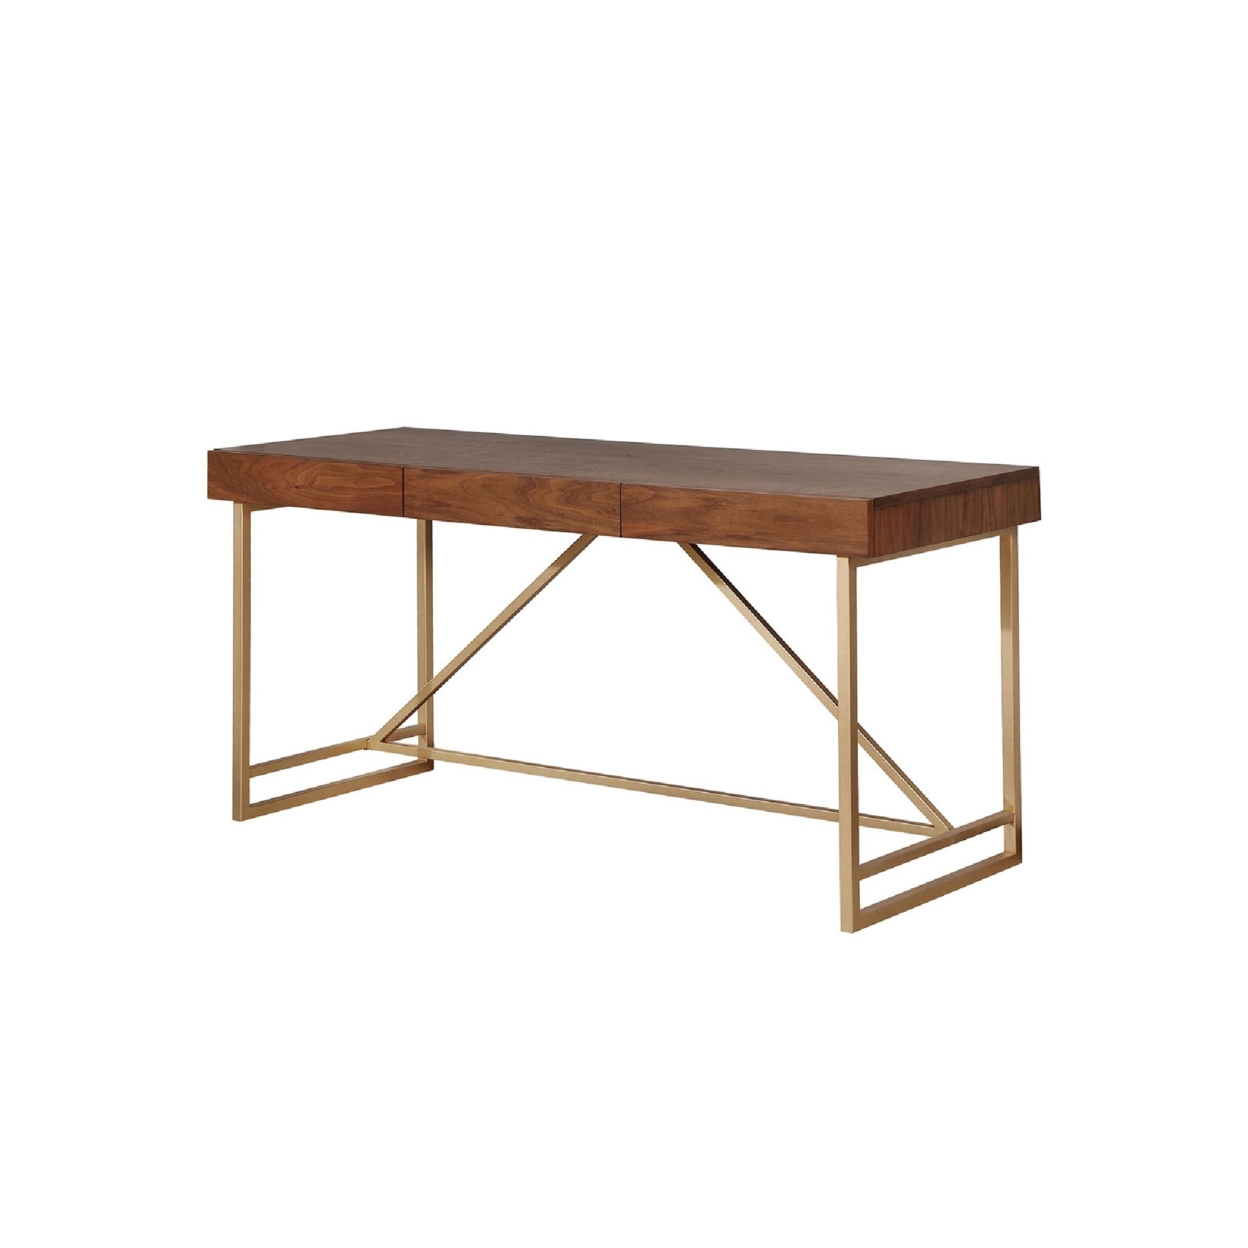 Modern Style Wooden Writing Desk With Unique Metal Legs, Walnut Brown And Gold- Saltoro Sherpi